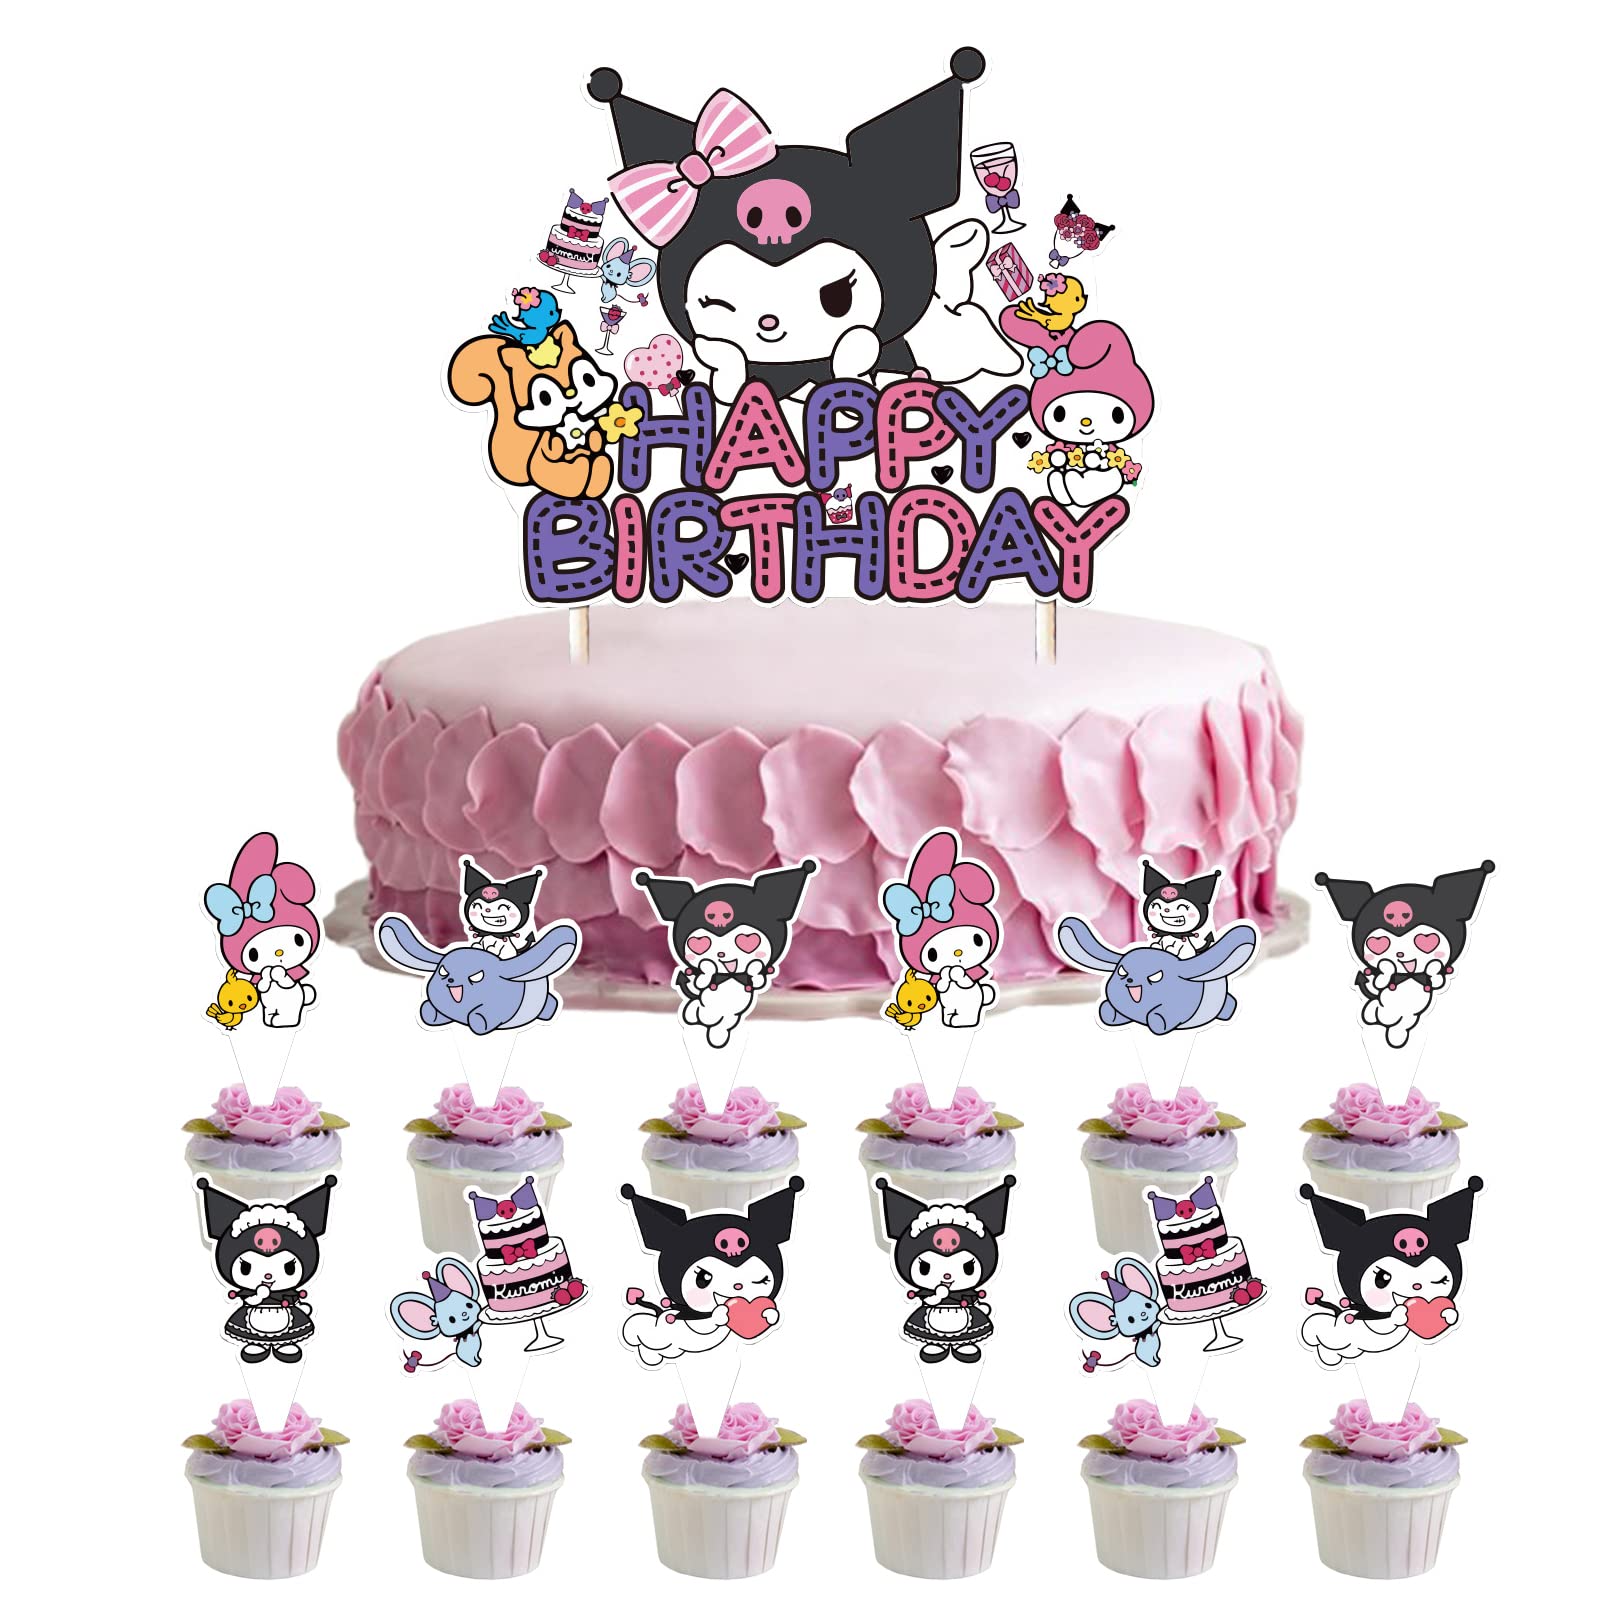 Round 20 Pcs Mixed Design Happy Birthday Cake Toppers Pack, For Bakery,  Packaging Type: Packet